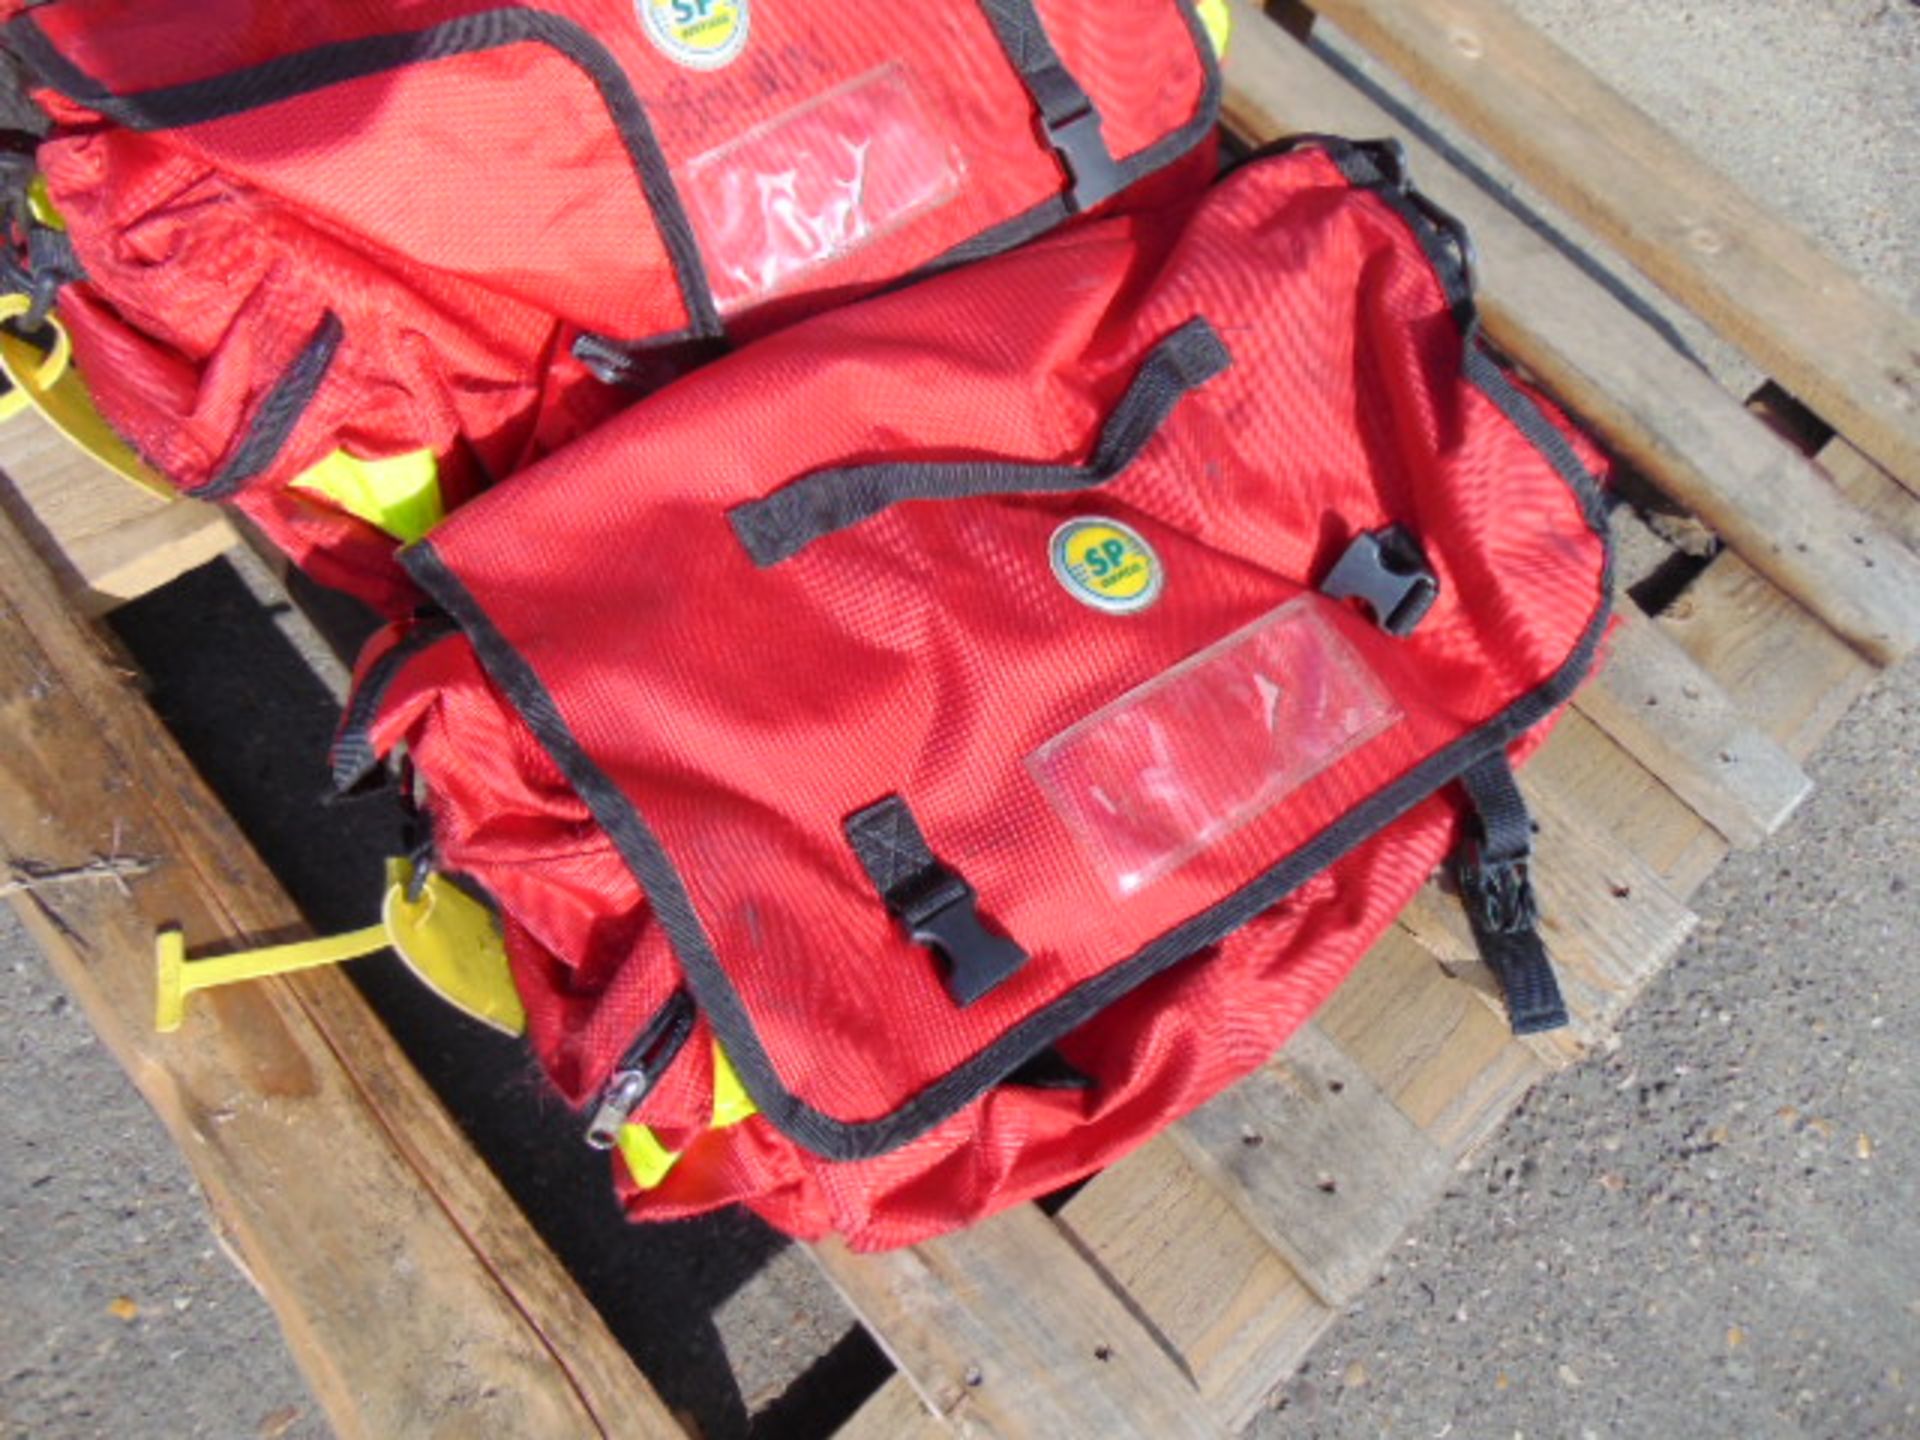 5 x SP Services Trauma Bags - Image 2 of 3